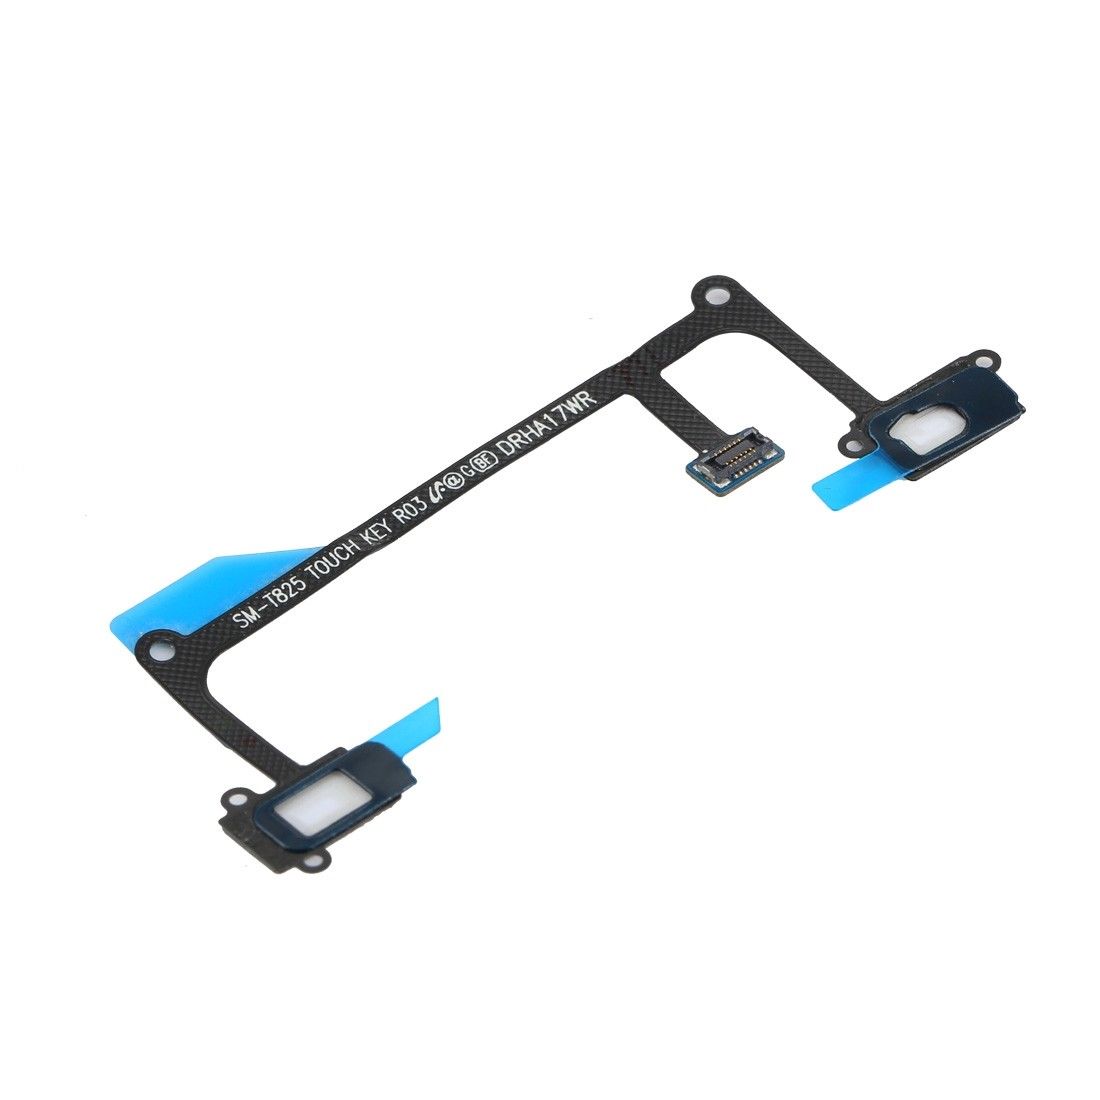 Samsung Galaxy Tab S3 9.7 Replacement Navigation Touch Button Flex Cable for [product_price] - First Help Tech